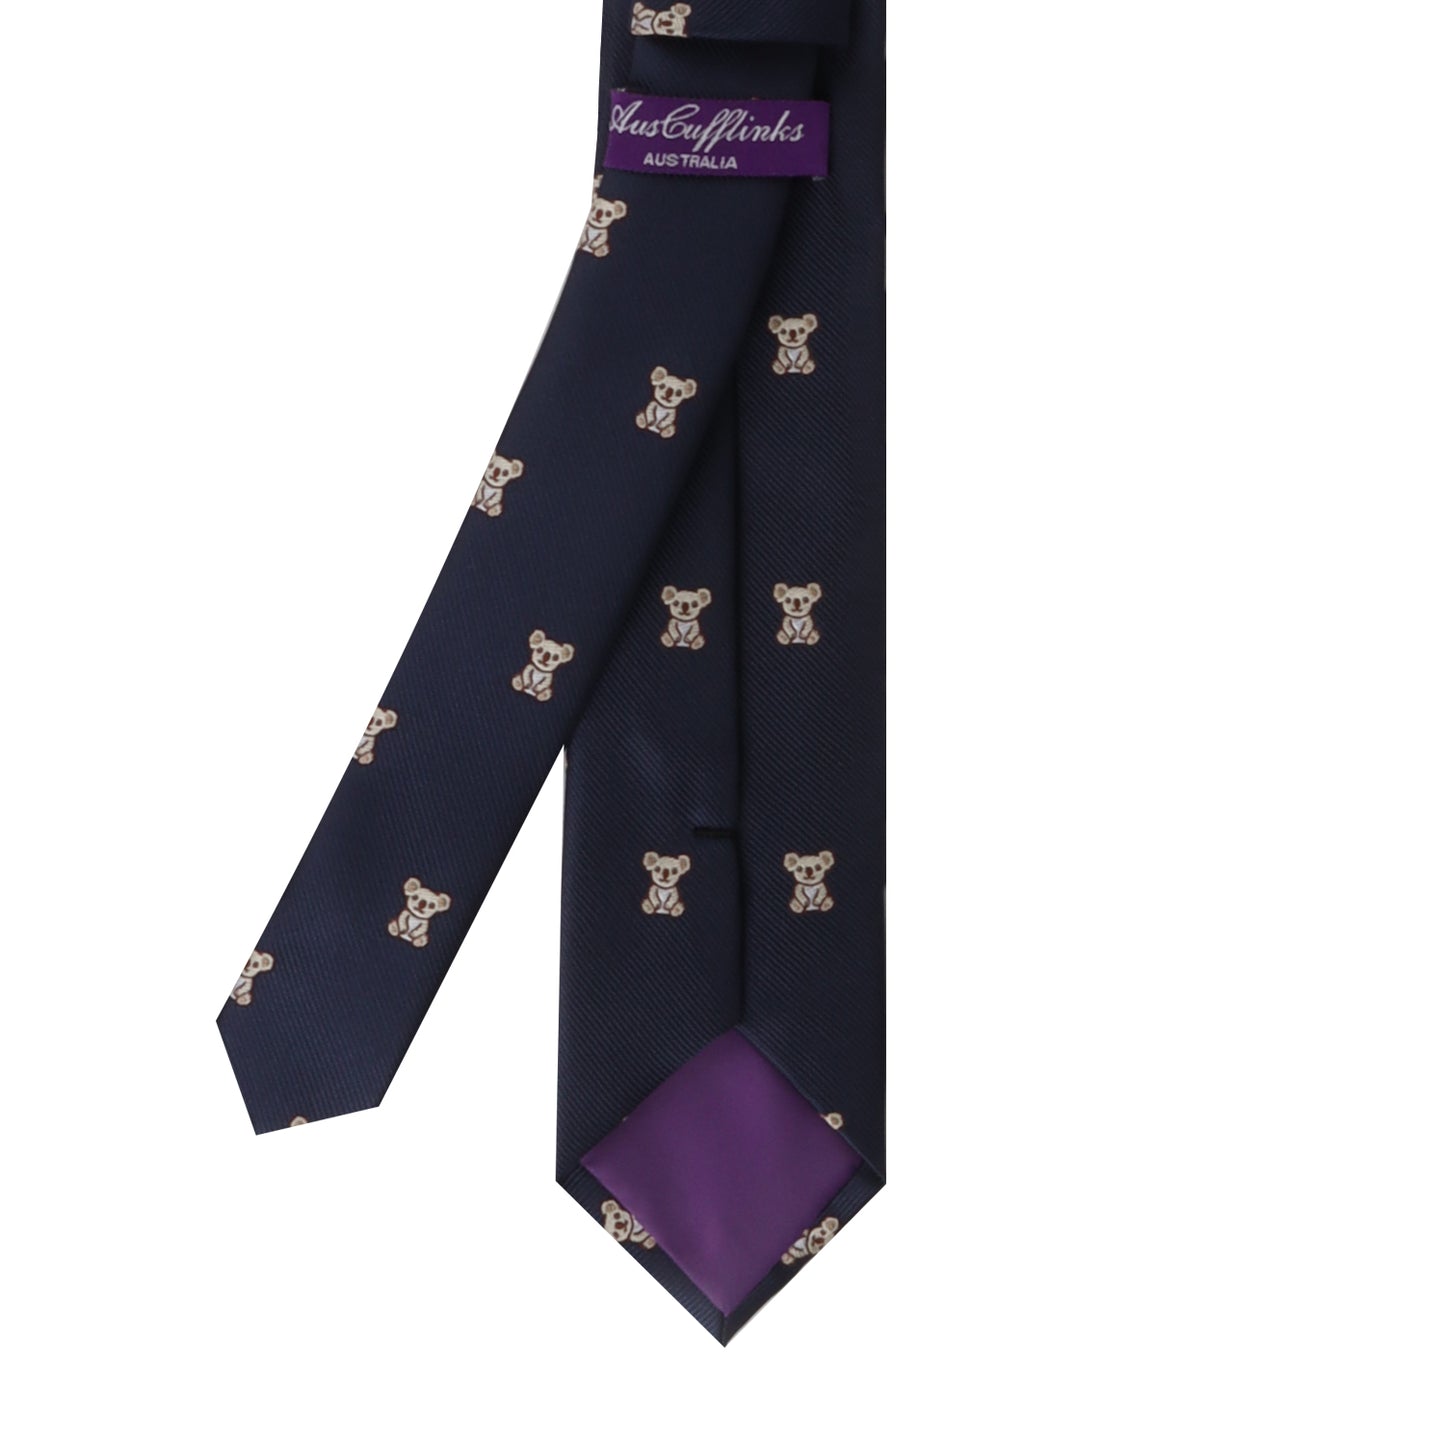 A dark blue Koala Skinny Tie featuring a pattern of cuddly teddy bears, with a purple label on the back.